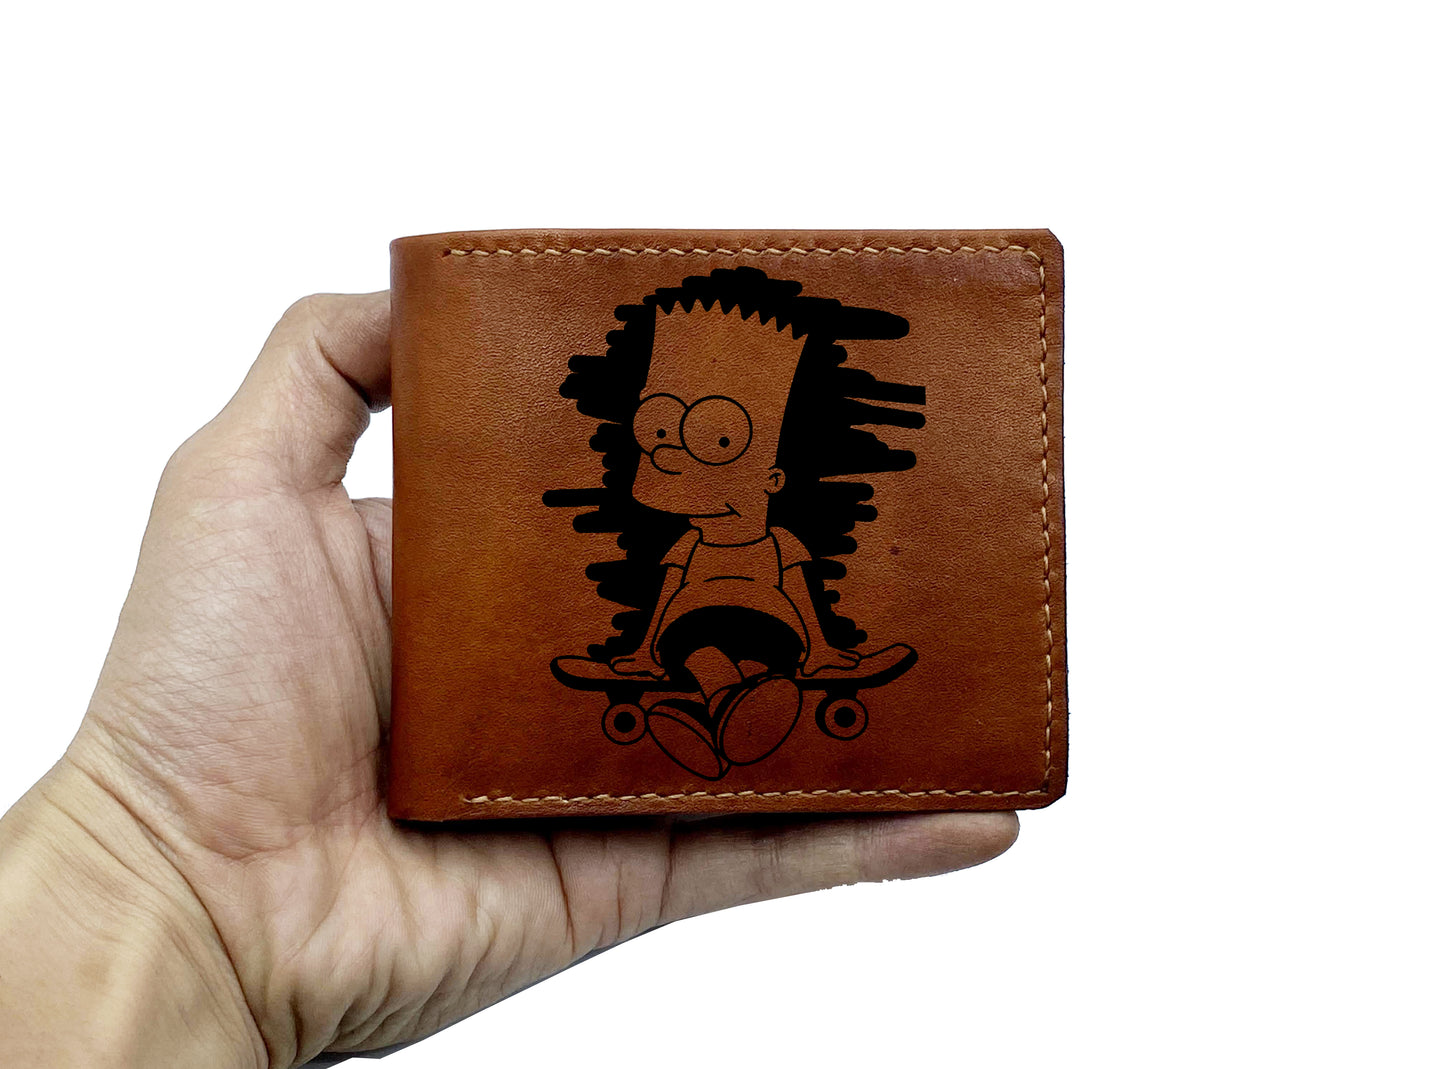 Mayan Corner - Personalized leather handmade wallet, The Simpsons movie engraving wallet, Homer and Bart Simpson, leather art wallet for him, gift for dad, husband